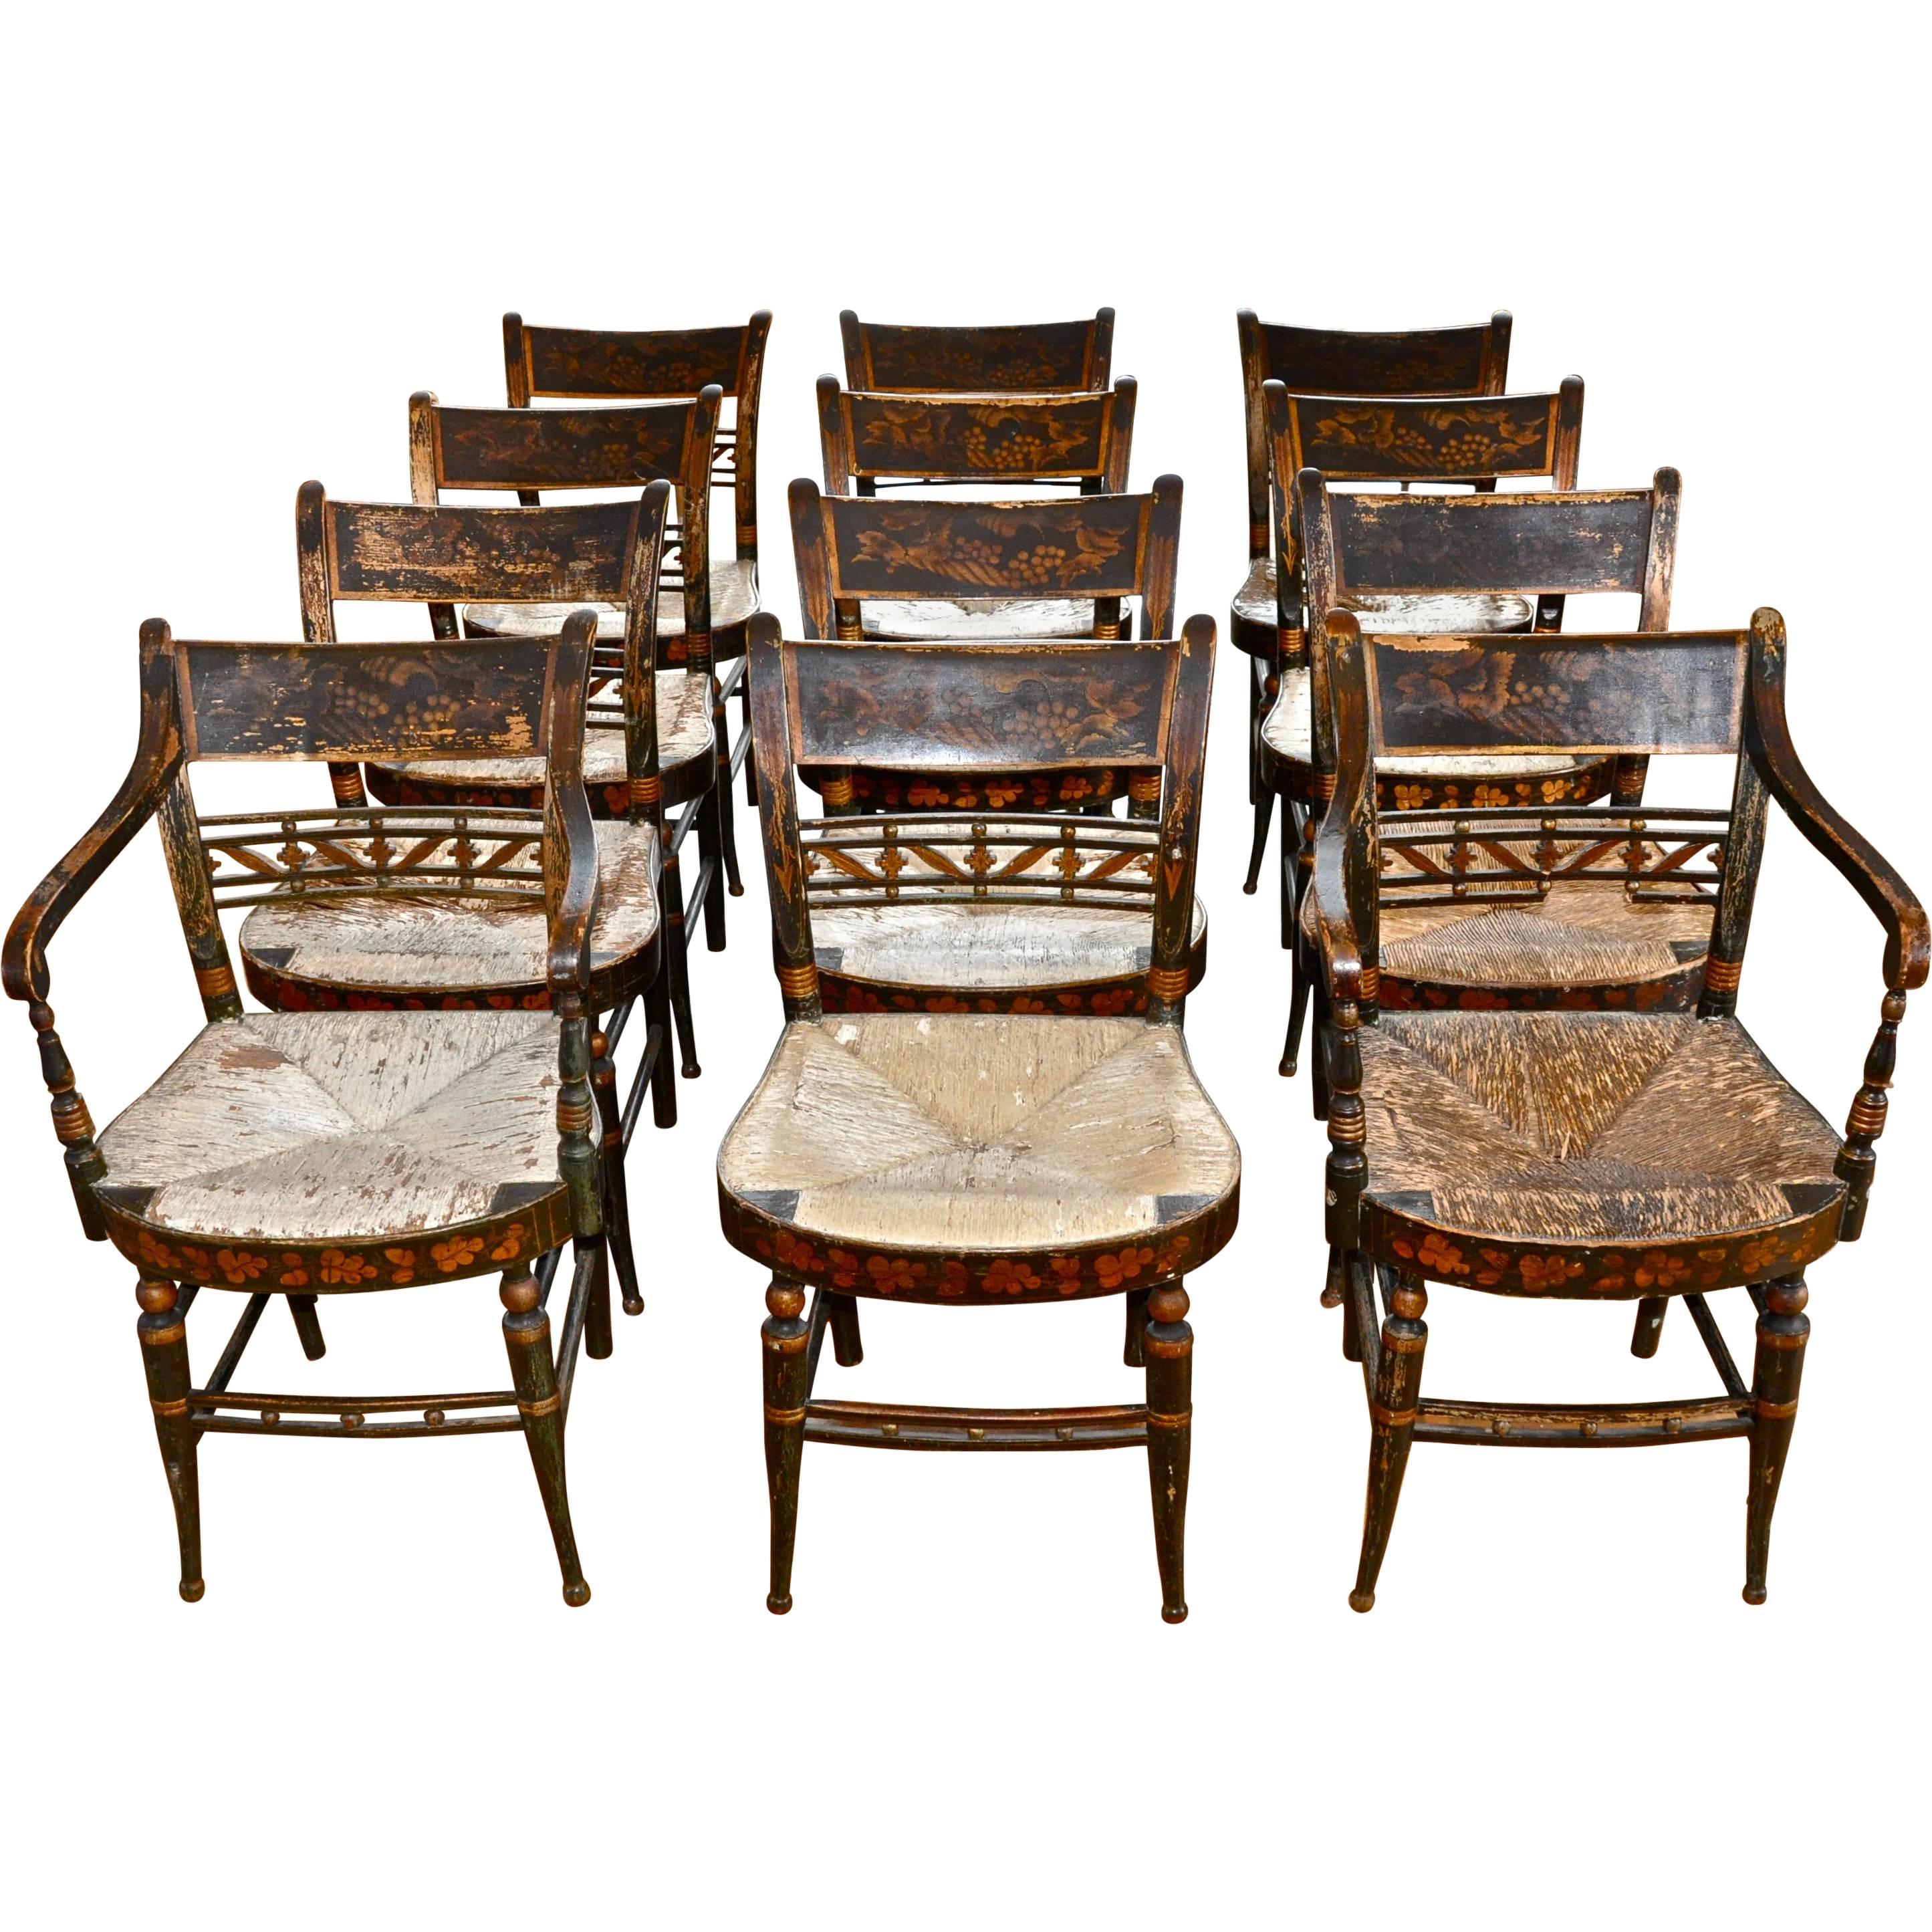 Rare Set of 12 Period Early 19th Century Sheraton Fancy Painted Dining Chairs